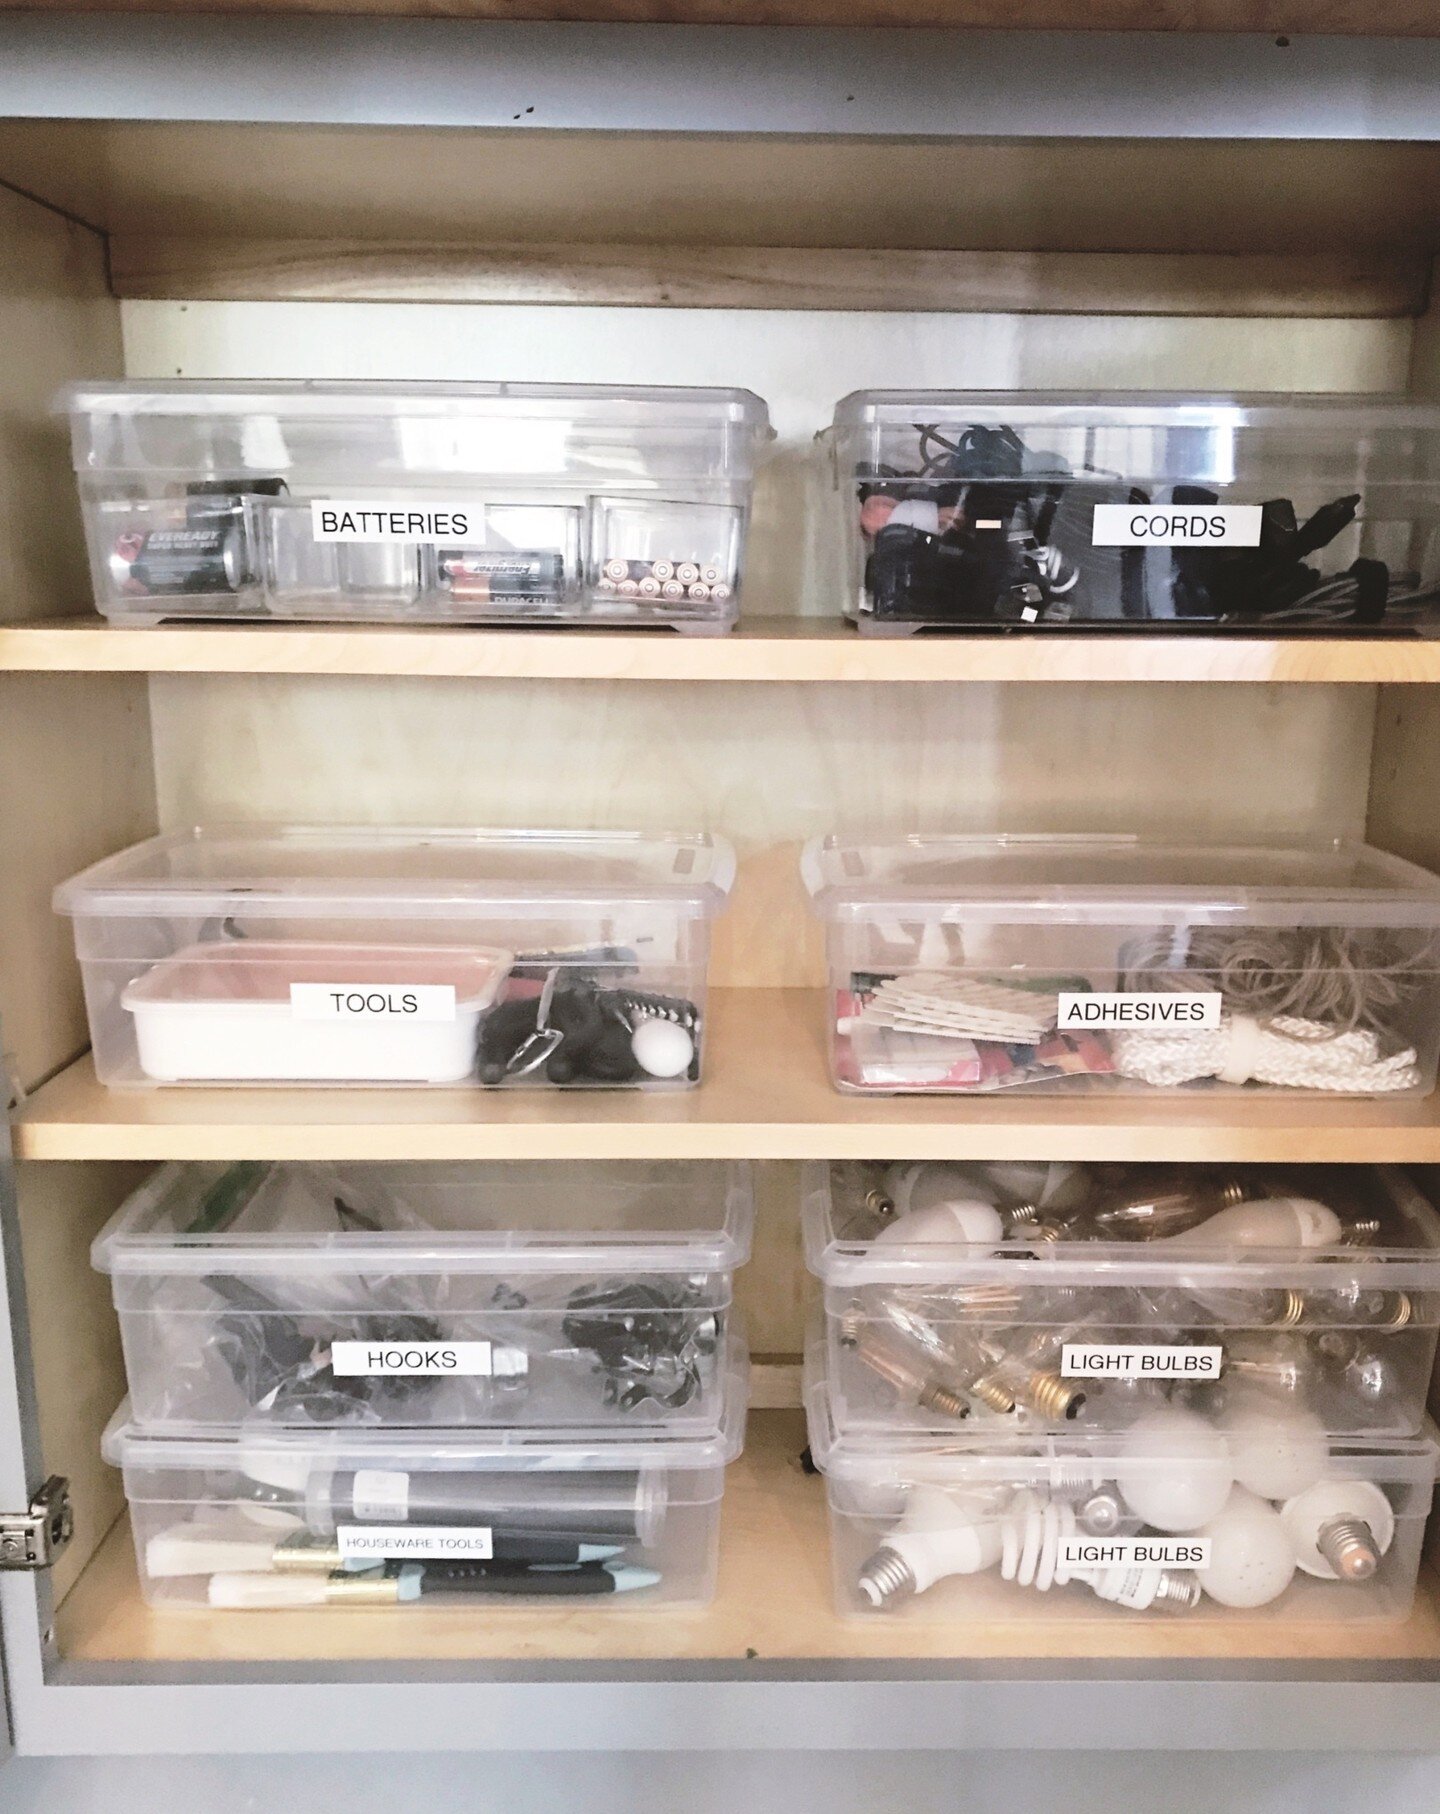 Tired of rummaging through a cluttered utility space? Let's turn that chaos into an organized haven! 

Here's a recipe for a tidier zone:
1.	Group Like with Like: Clear out the cobwebs by sorting tools and gadgets. Group batteries, light bulbs, candl